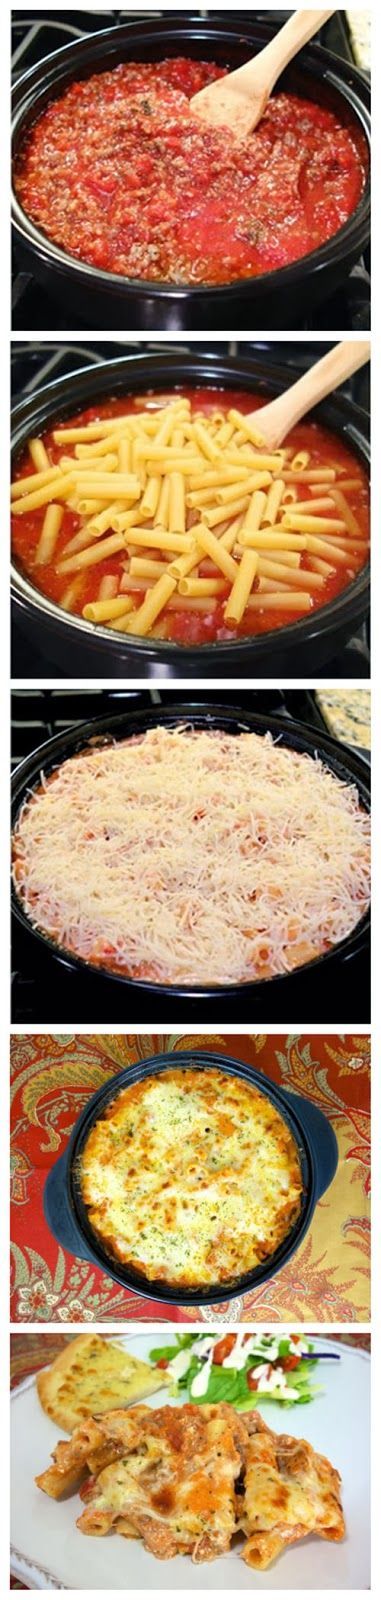 One-Pot Baked Ziti-use more ricotta cheese and tomatoes next time